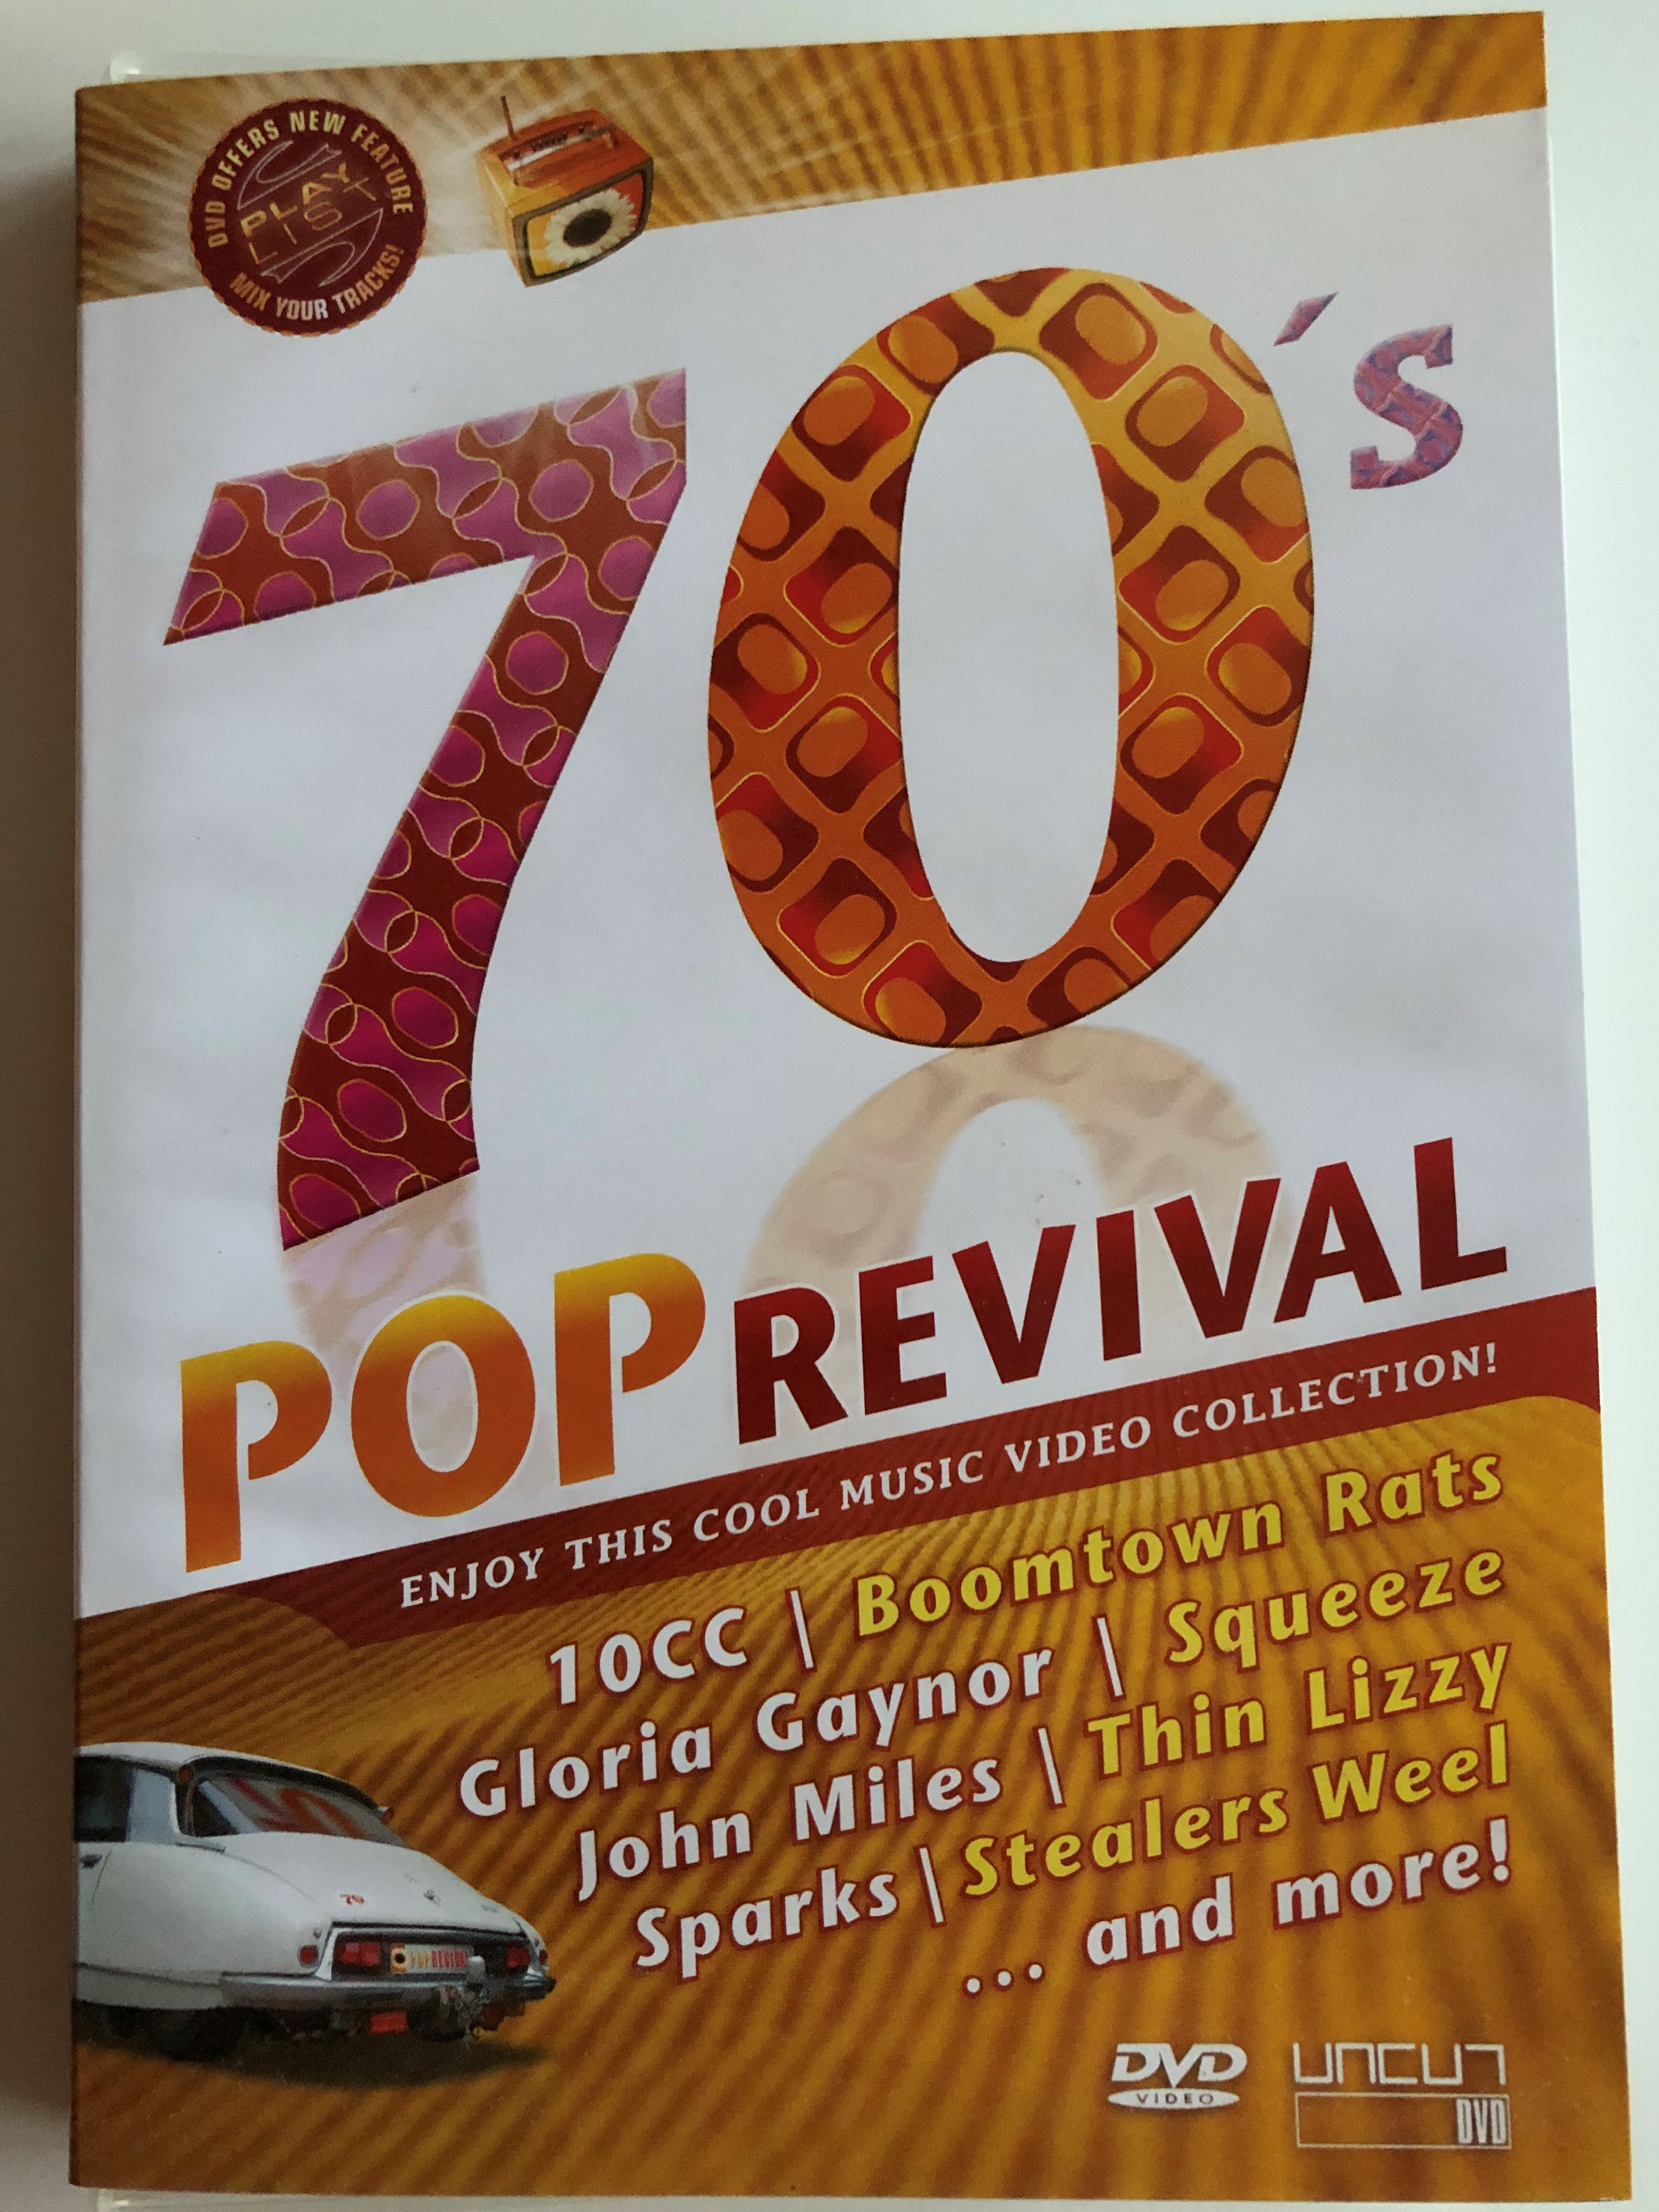 70-s-pop-revival-dvd-enjoy-this-cool-music-video-collection-1.jpg